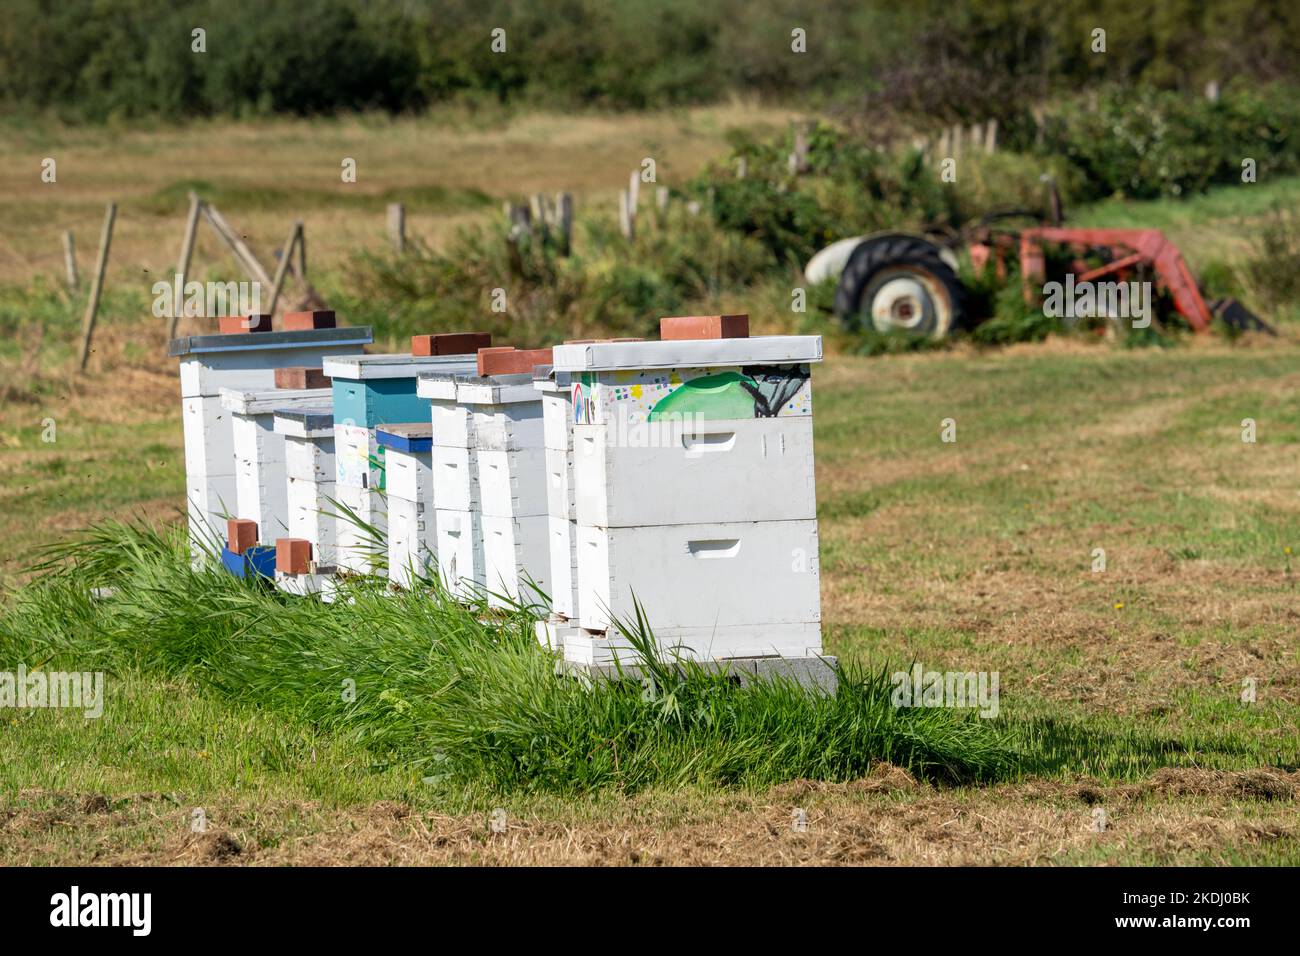 Chimacum, Washington, USA.  Langstroth beehives in a row in a rural setting, with colorful children's artwork on them. Stock Photo